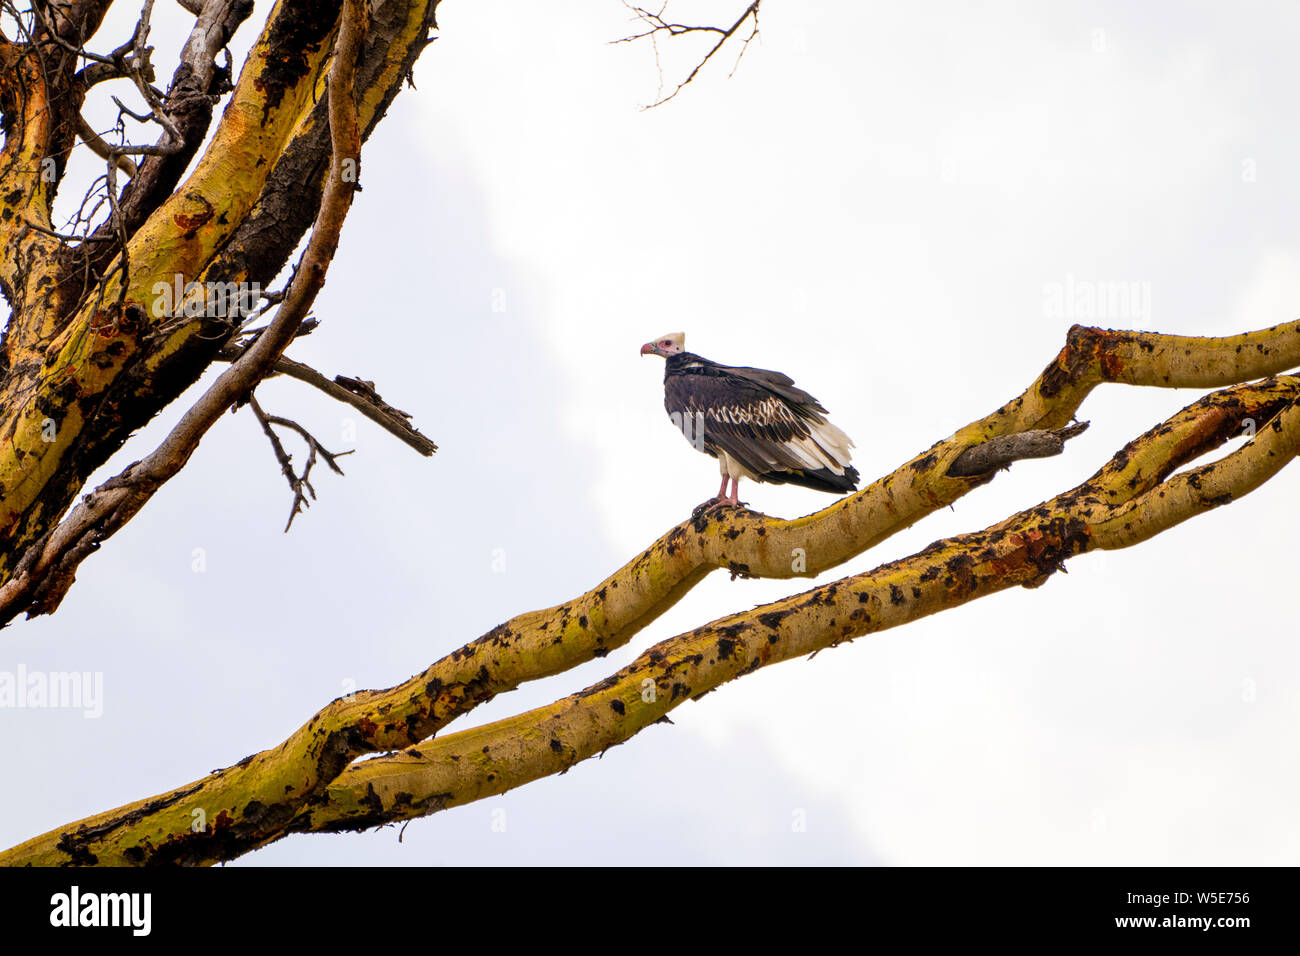 White-headed vulture (Trigonoceps occipitalis) Critically endangered bird species endemic to Africa. Photographed at Serengeti National Park, Tanzania Stock Photo